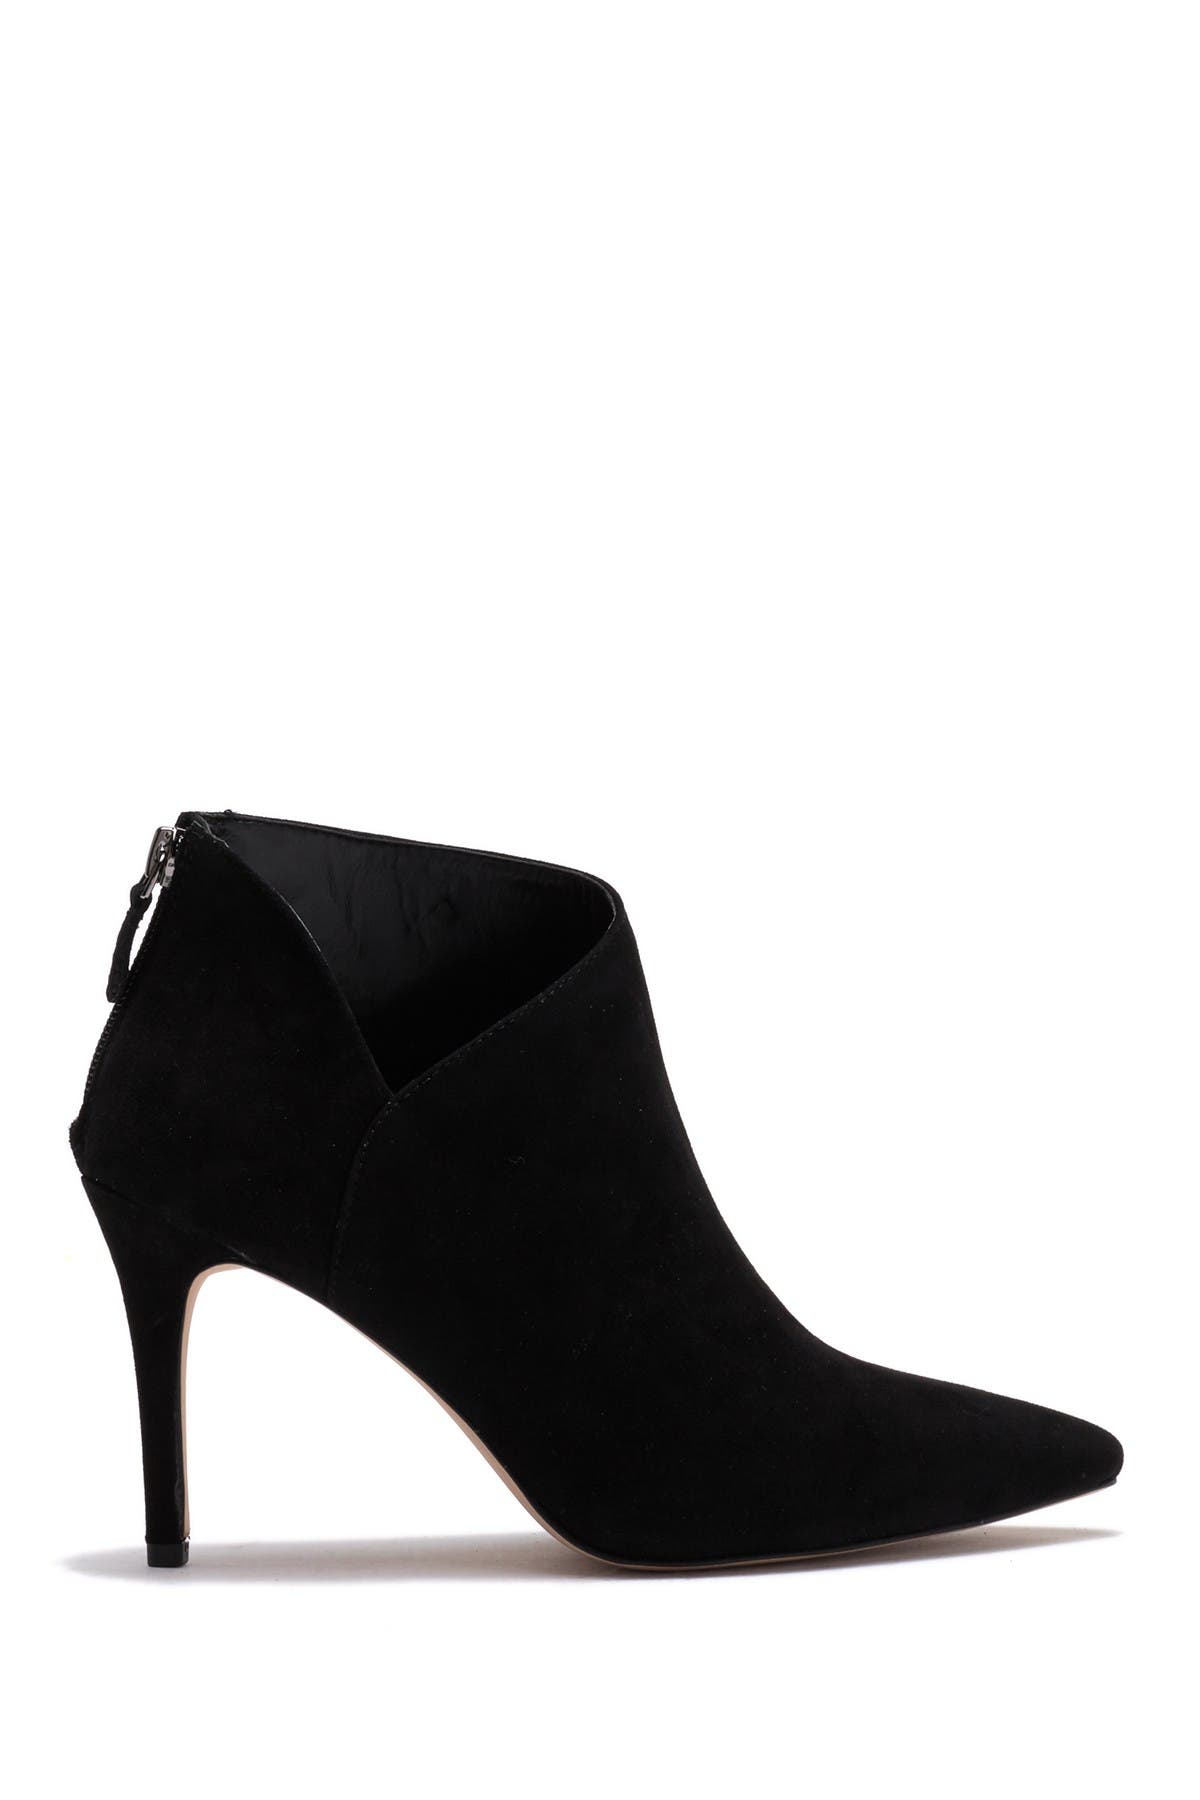 enzo angiolini ruthely suede bootie